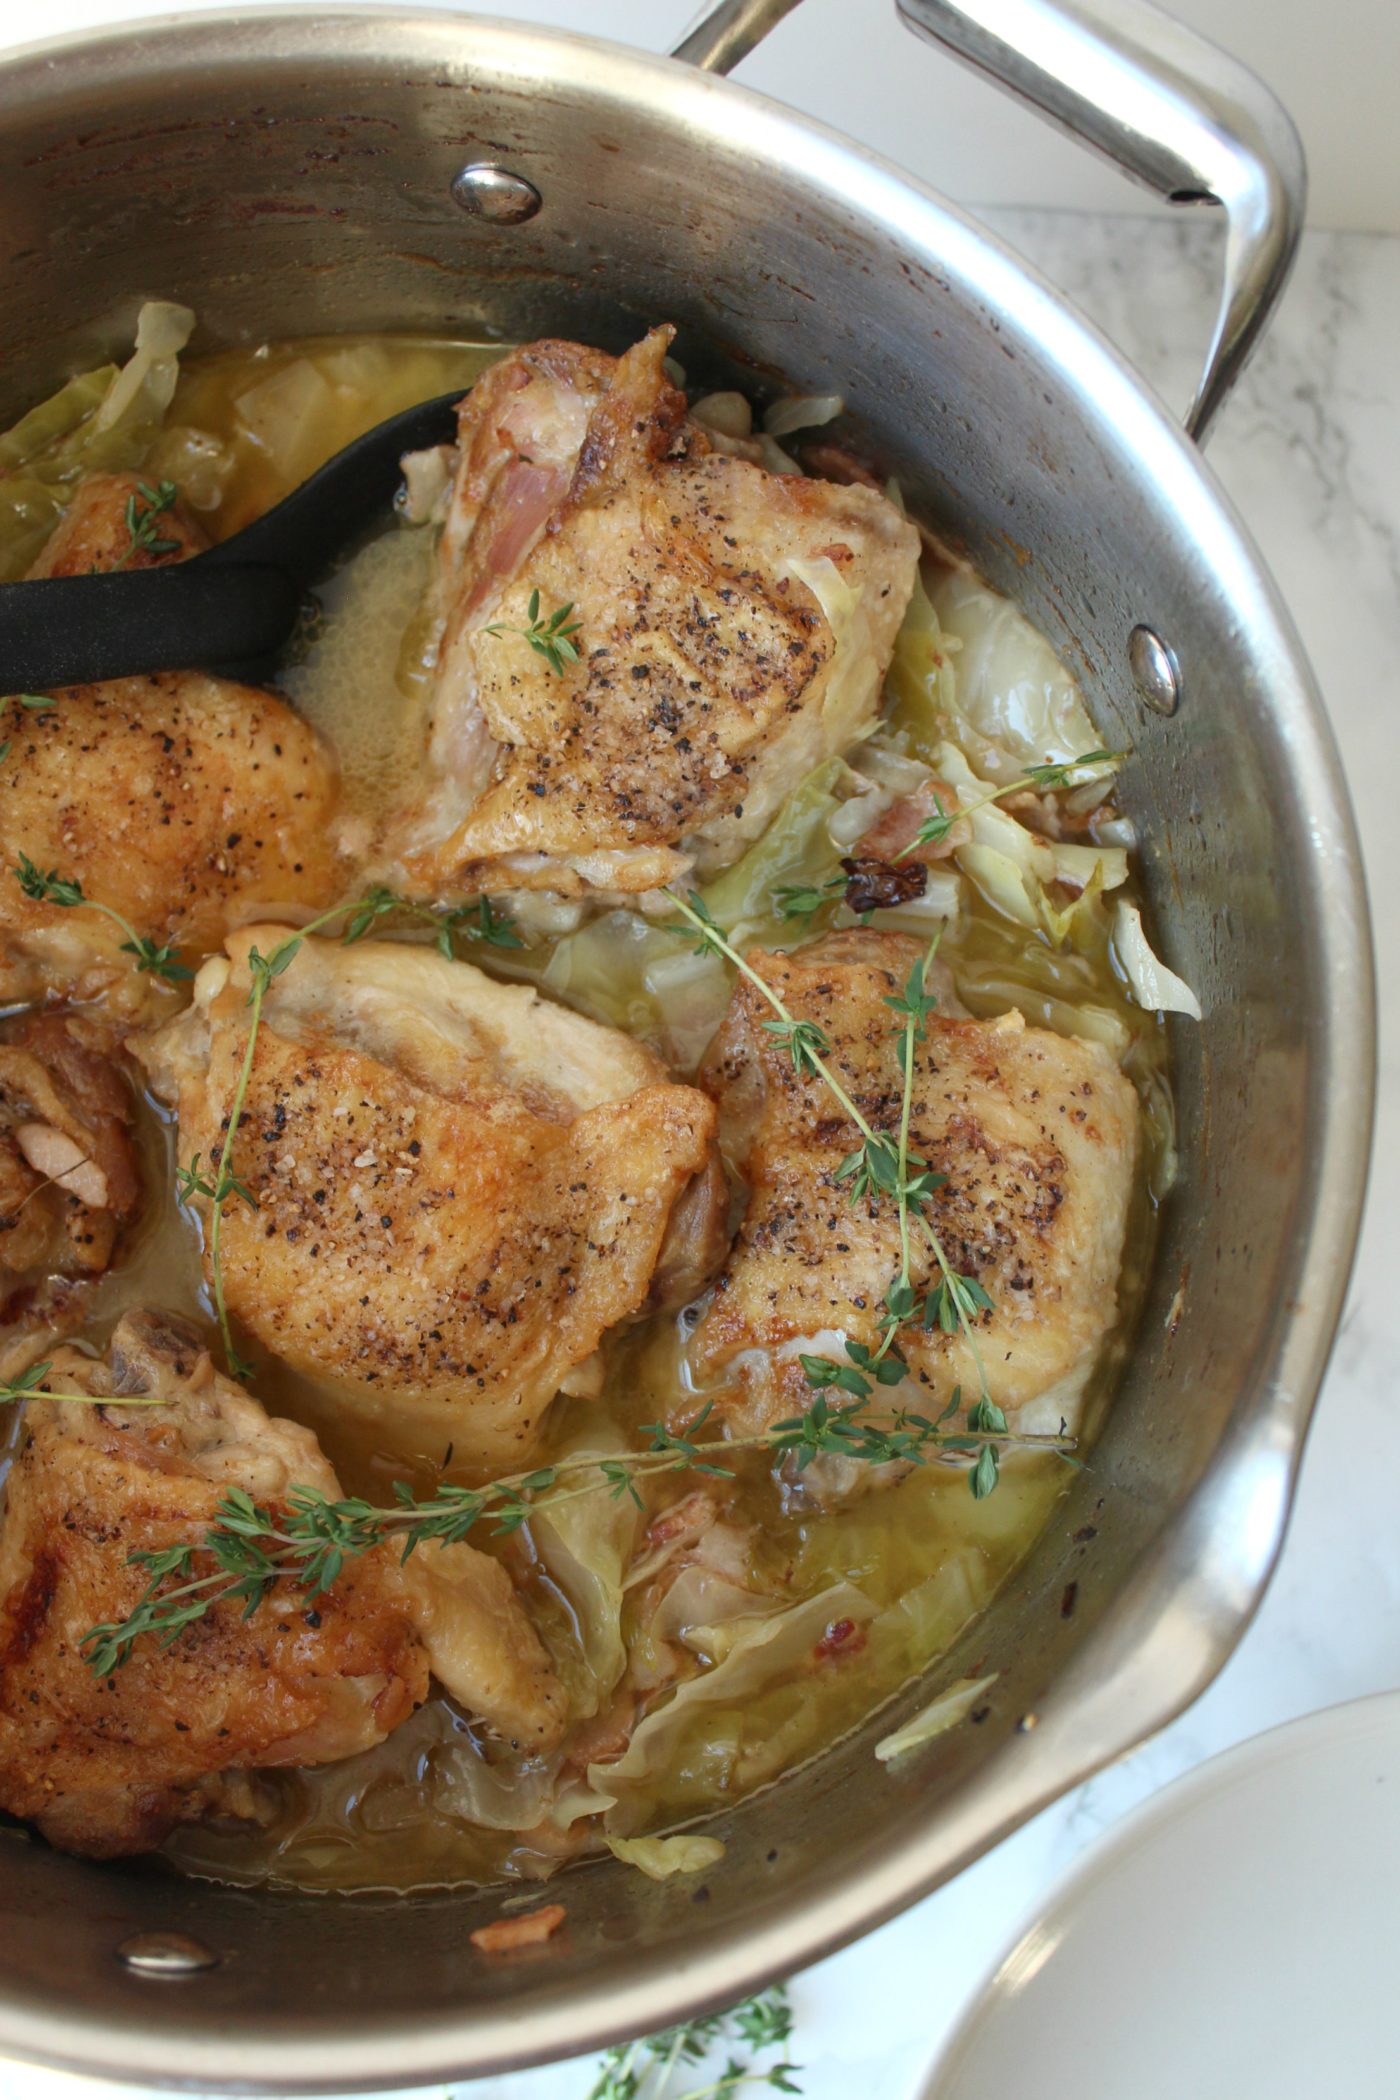 Braised chicken thighs and cabbage.